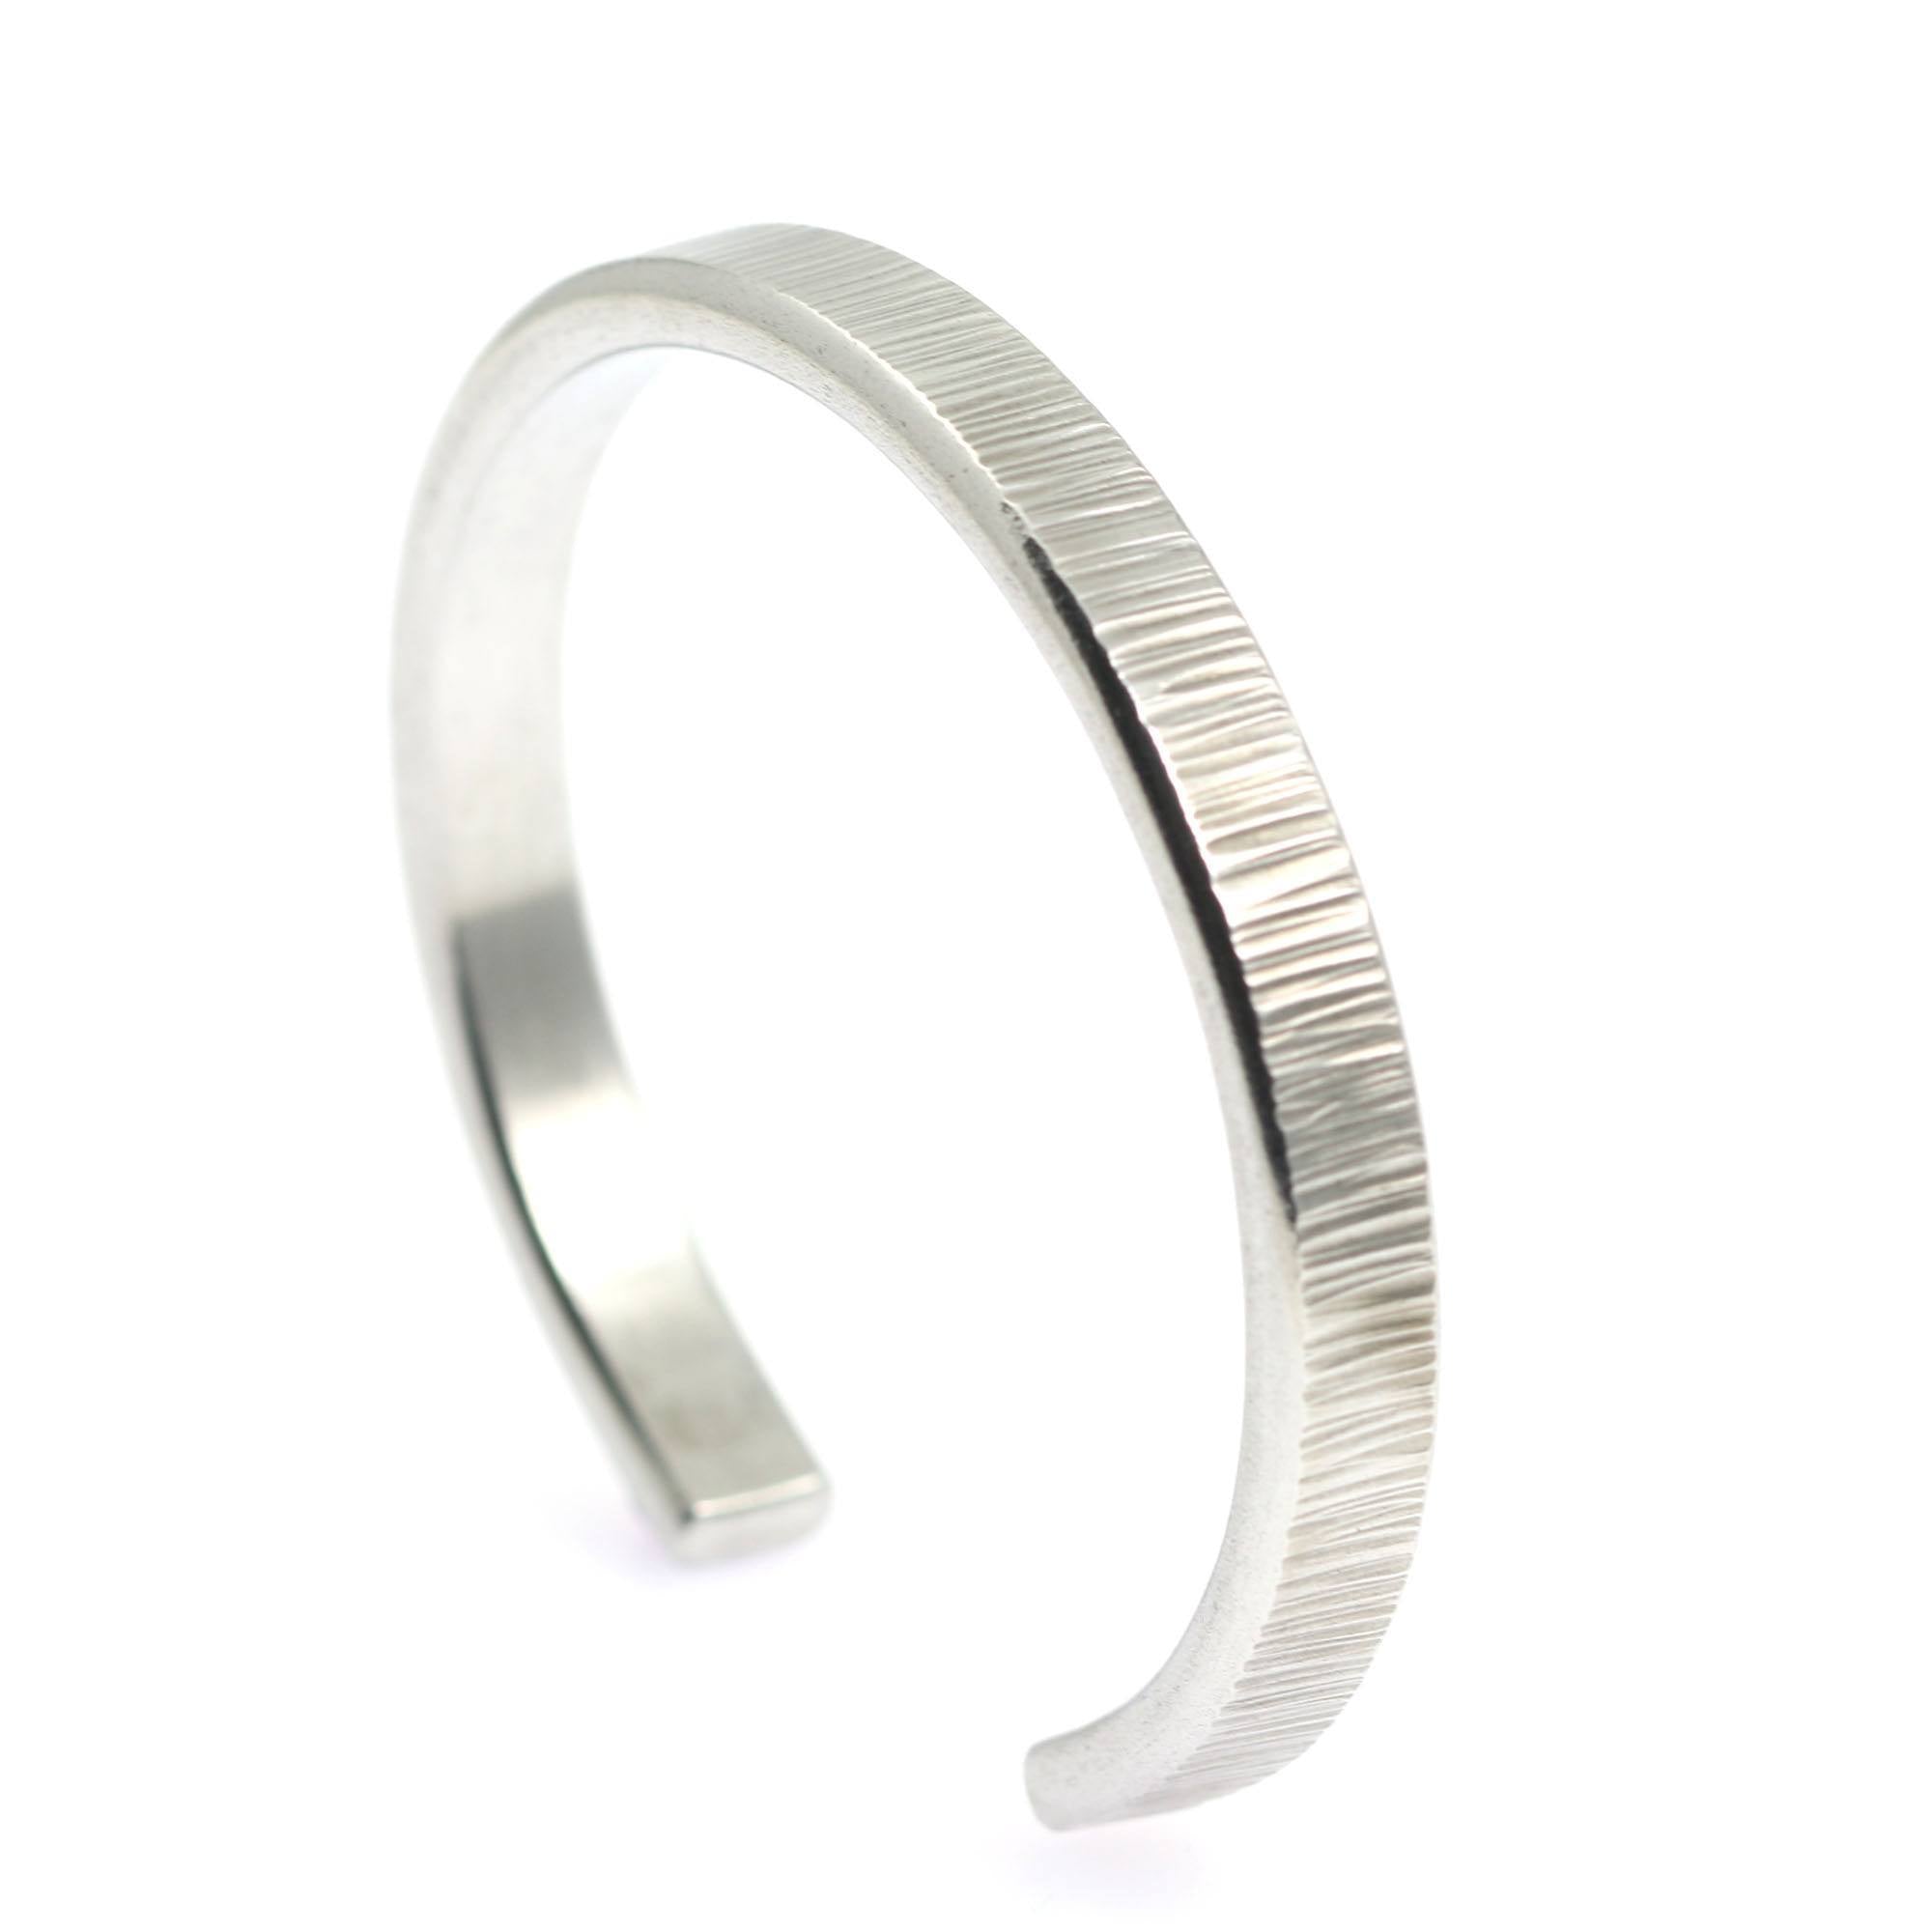 Thin Chased Aluminum Cuff Bracelet - Right View